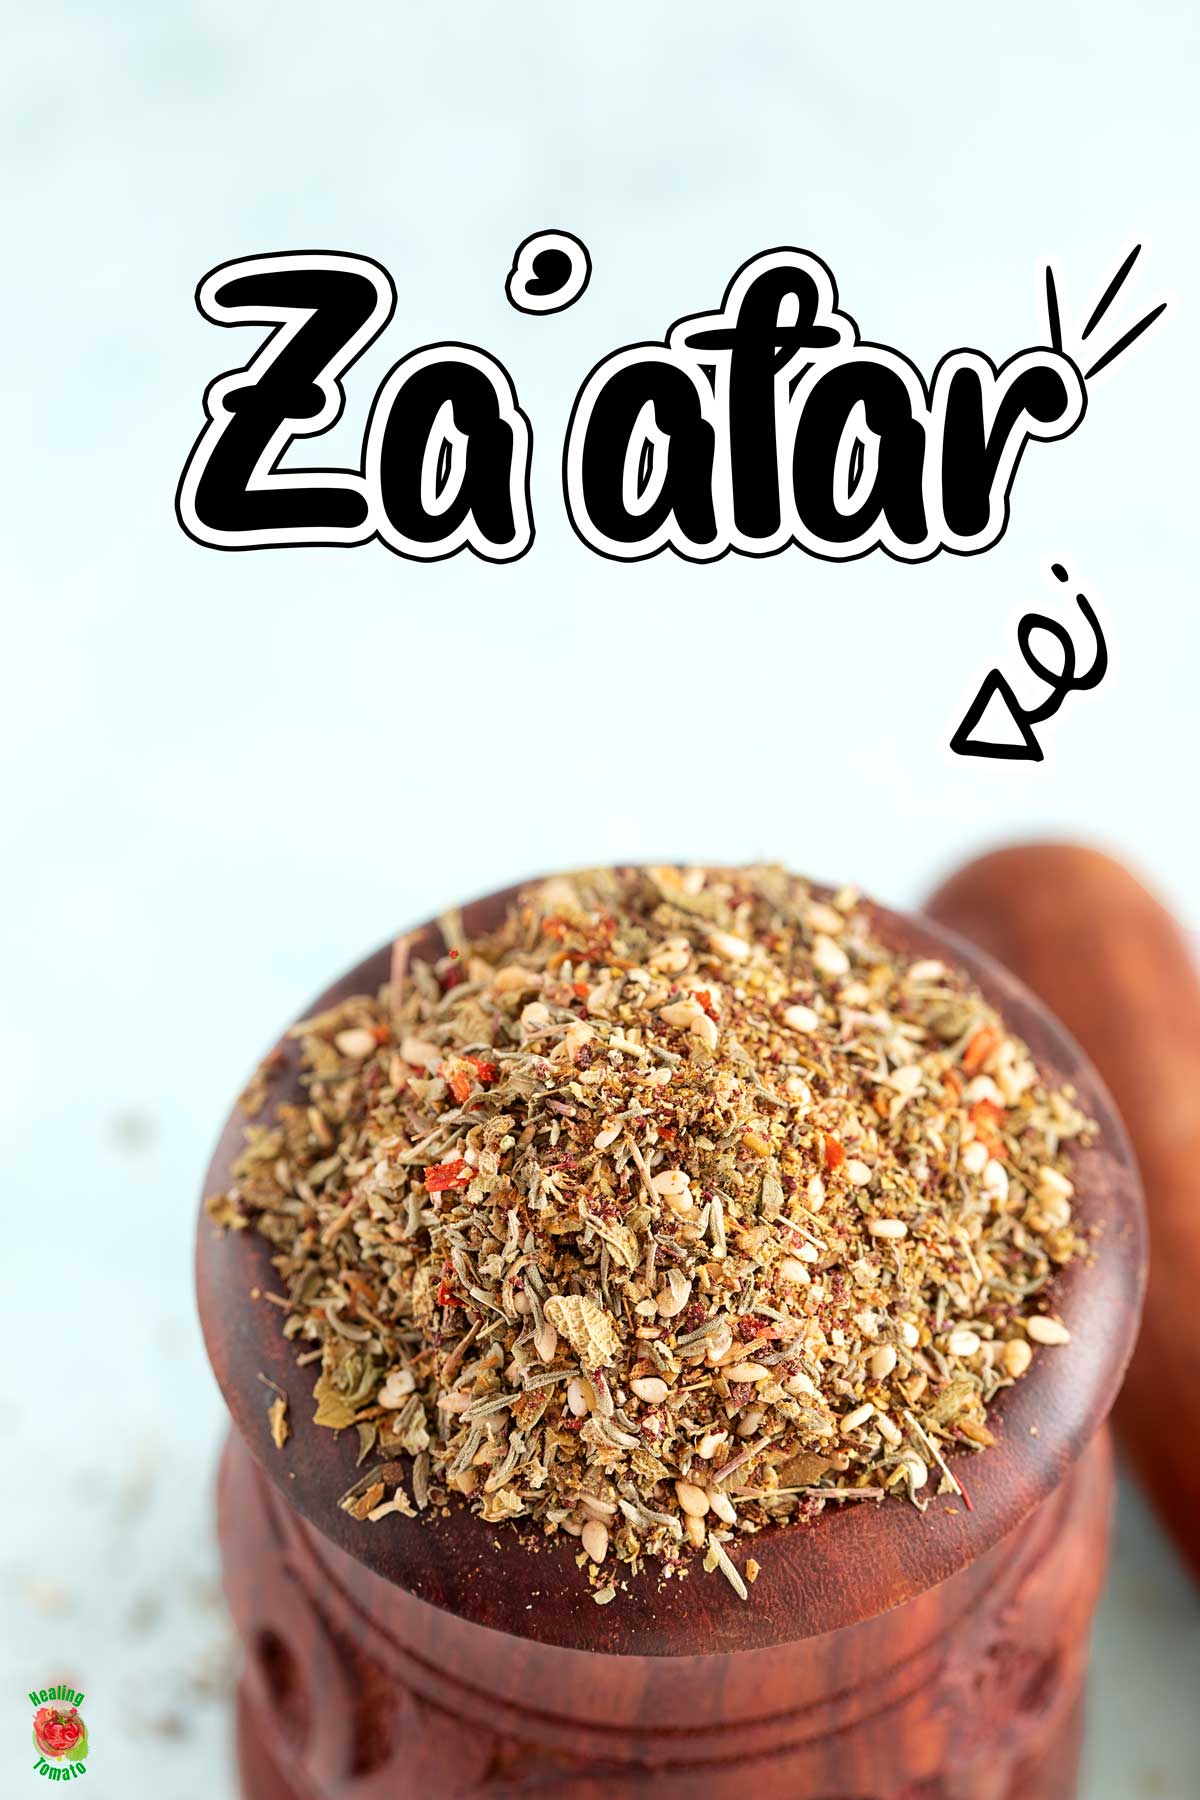 Top and closeup view of a wooden mortar filled with za'atar spice